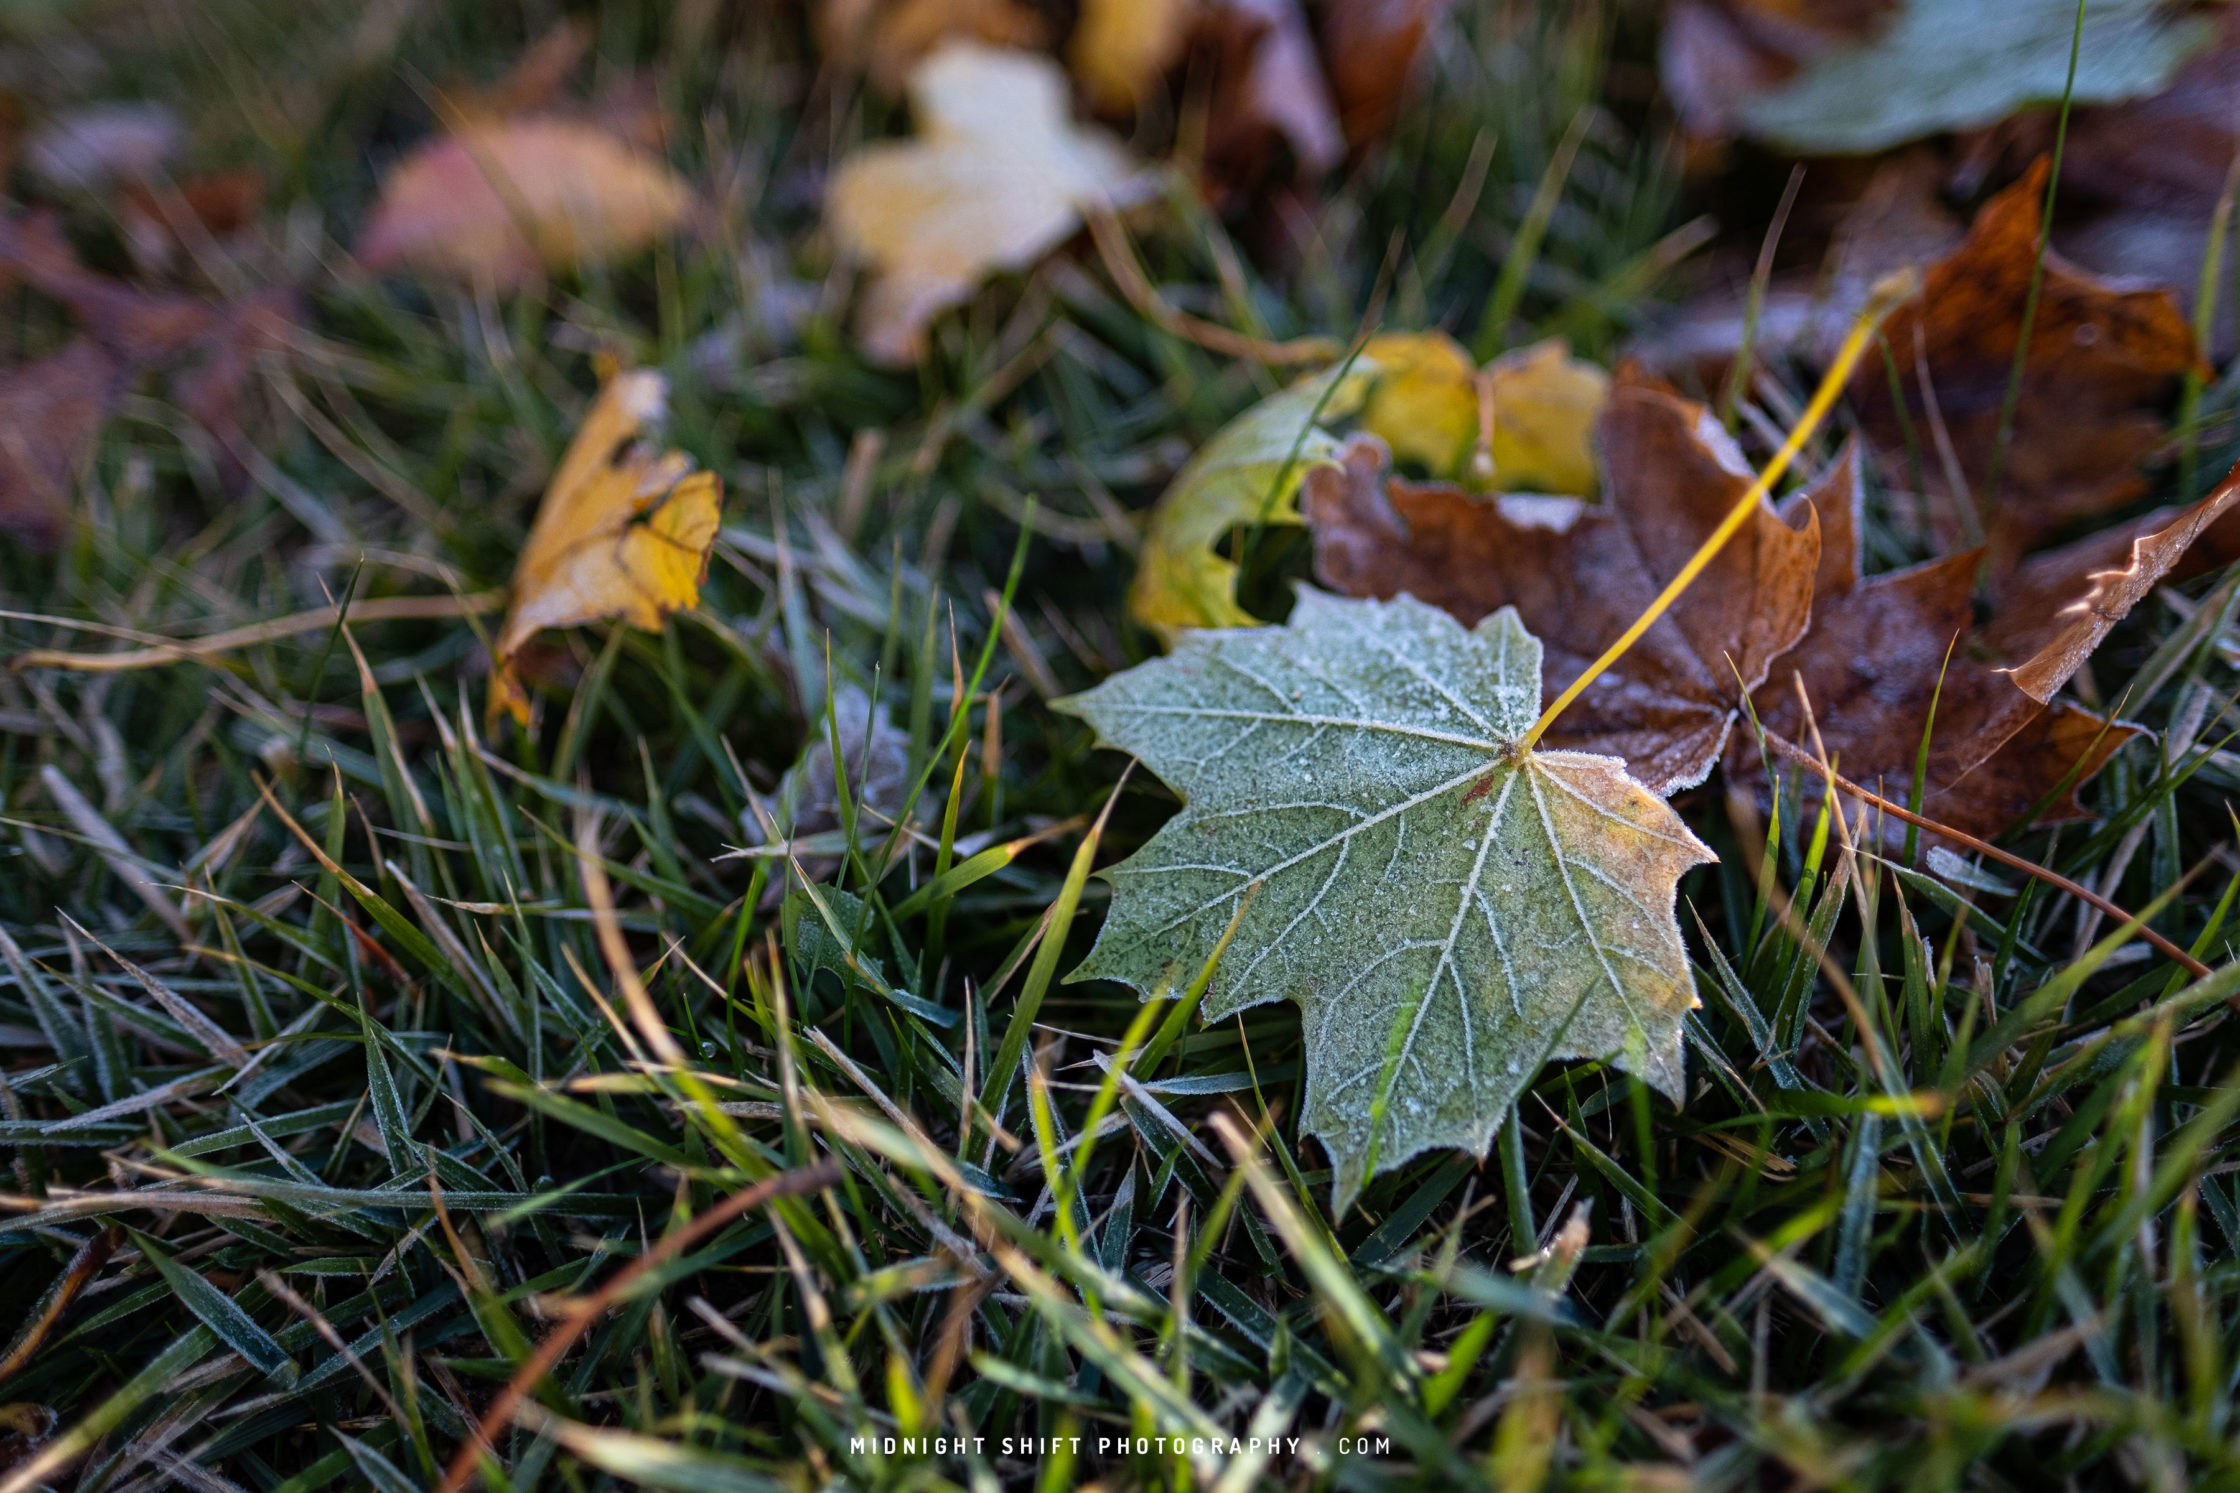 A leaf coated in a layer of frost sits on a bed of grass